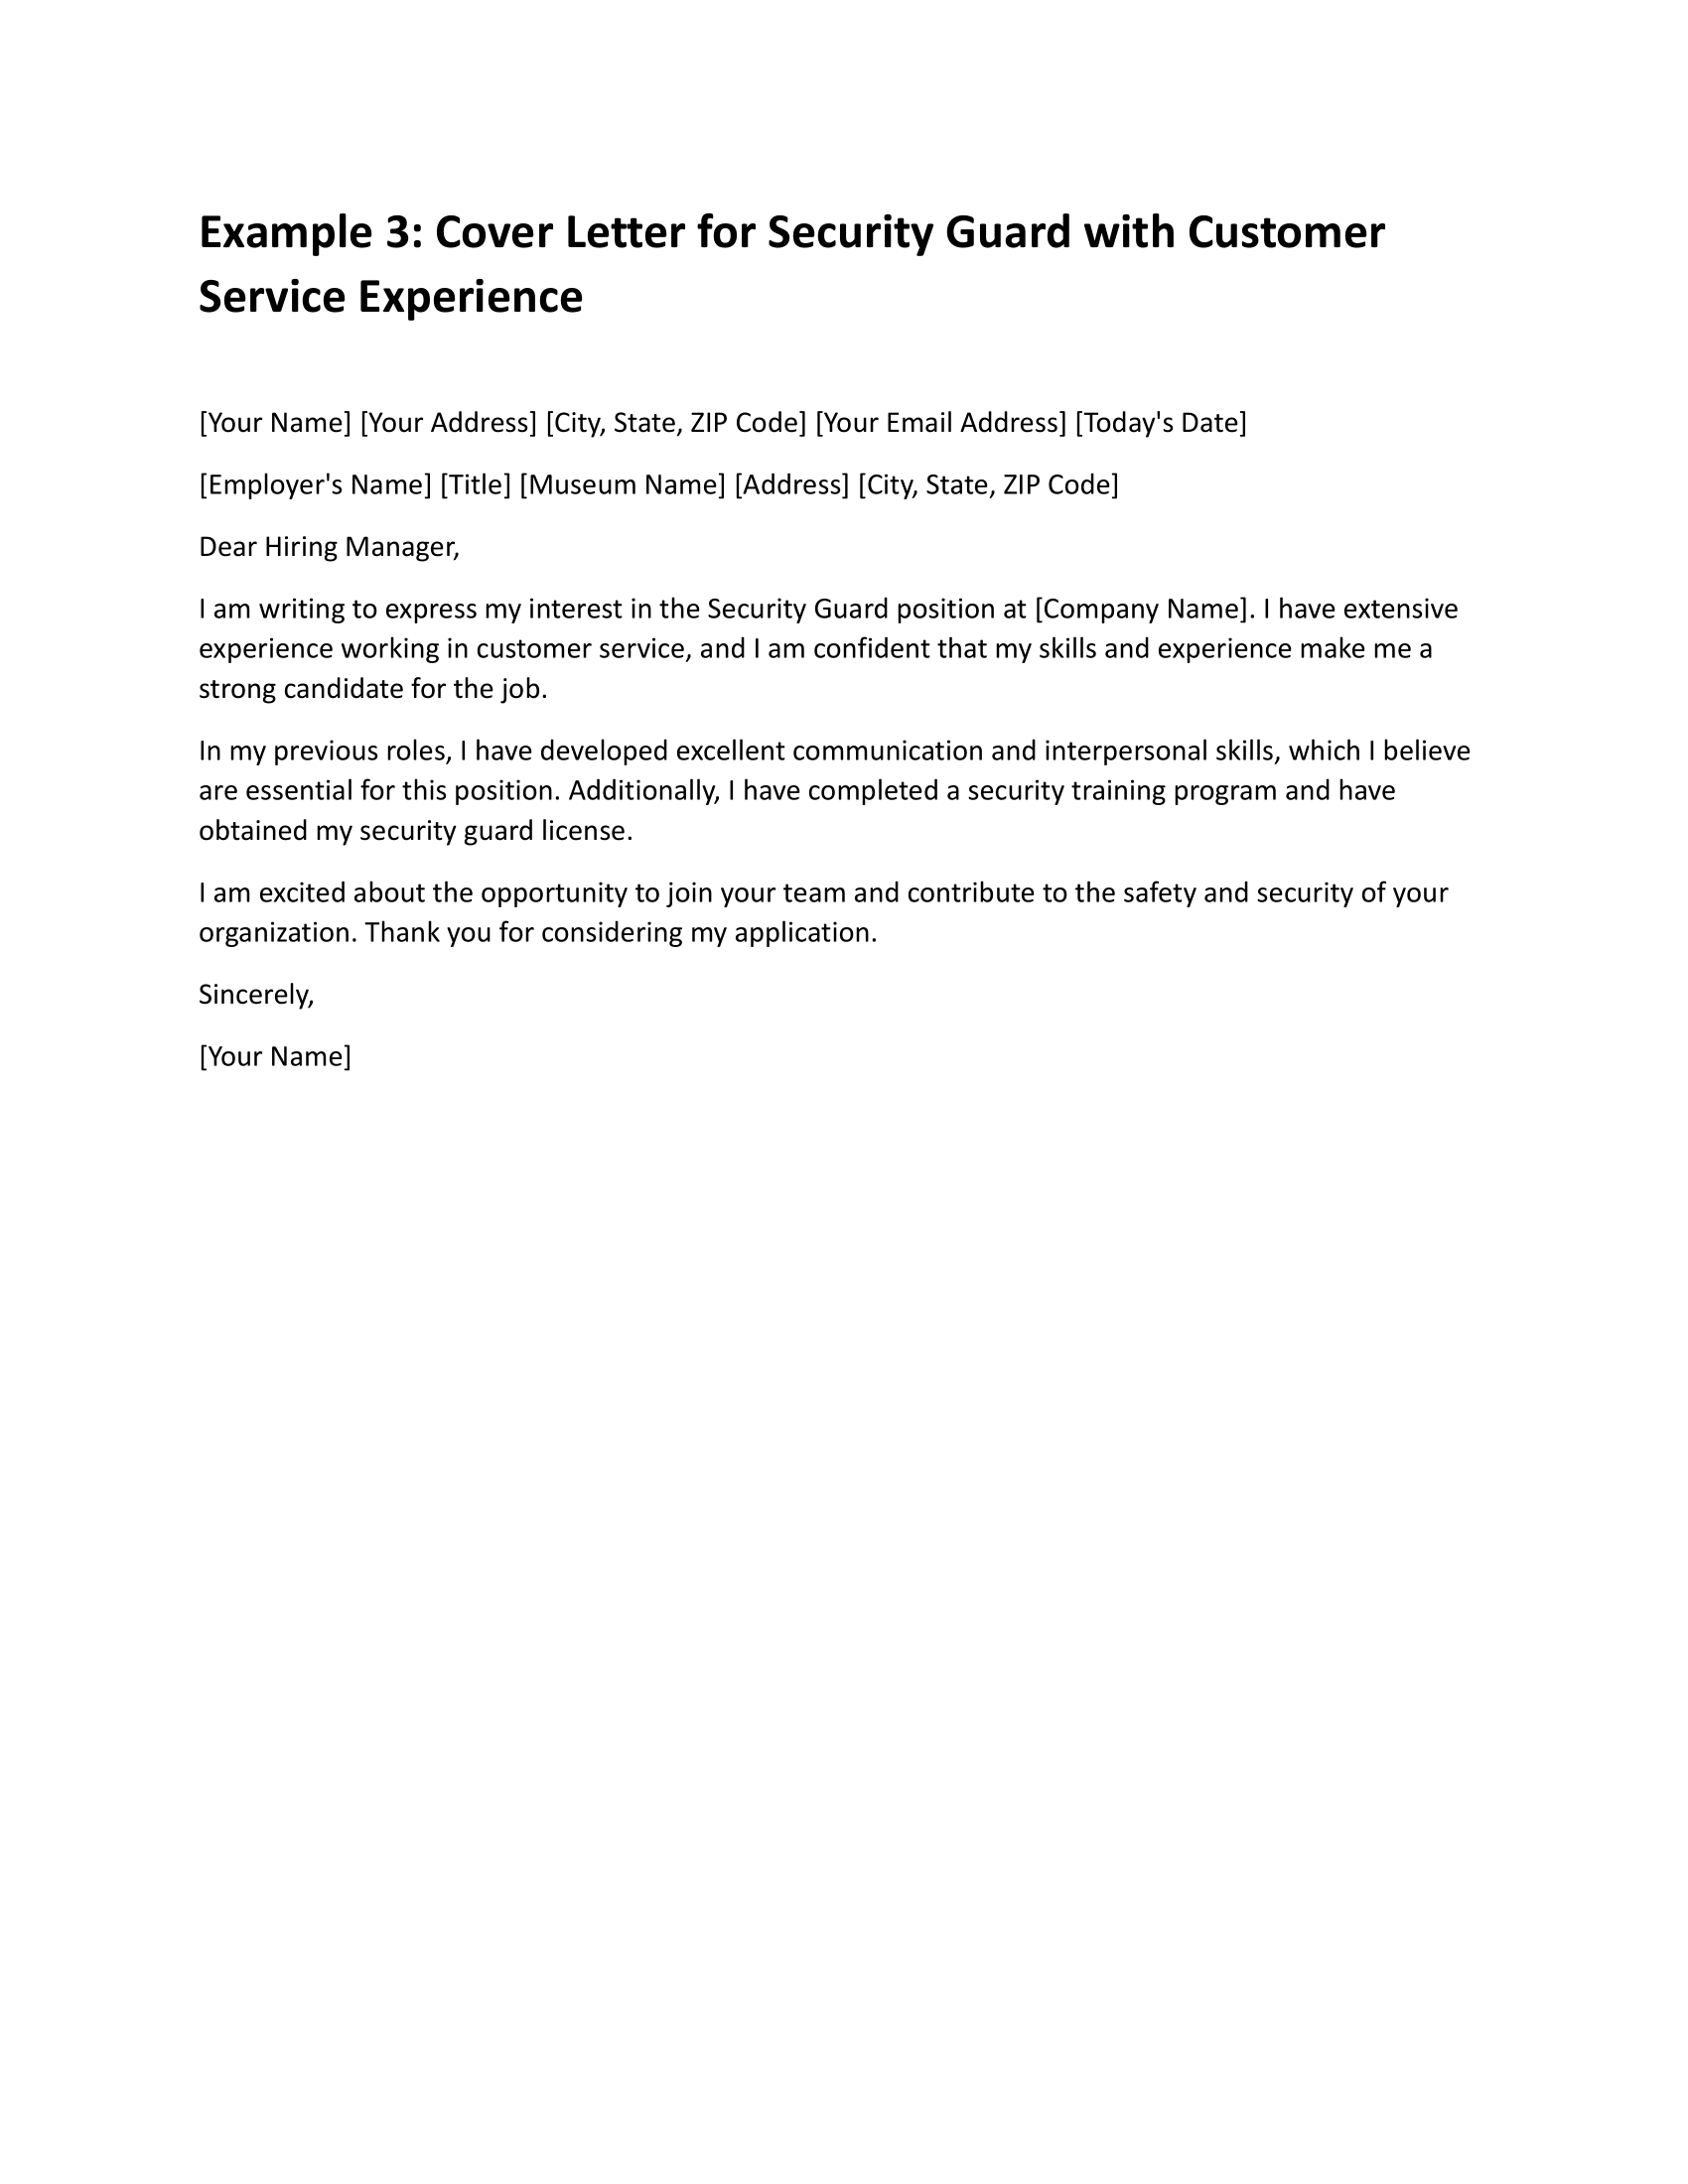 Cover Letter for Security Guard with Customer Service Experience